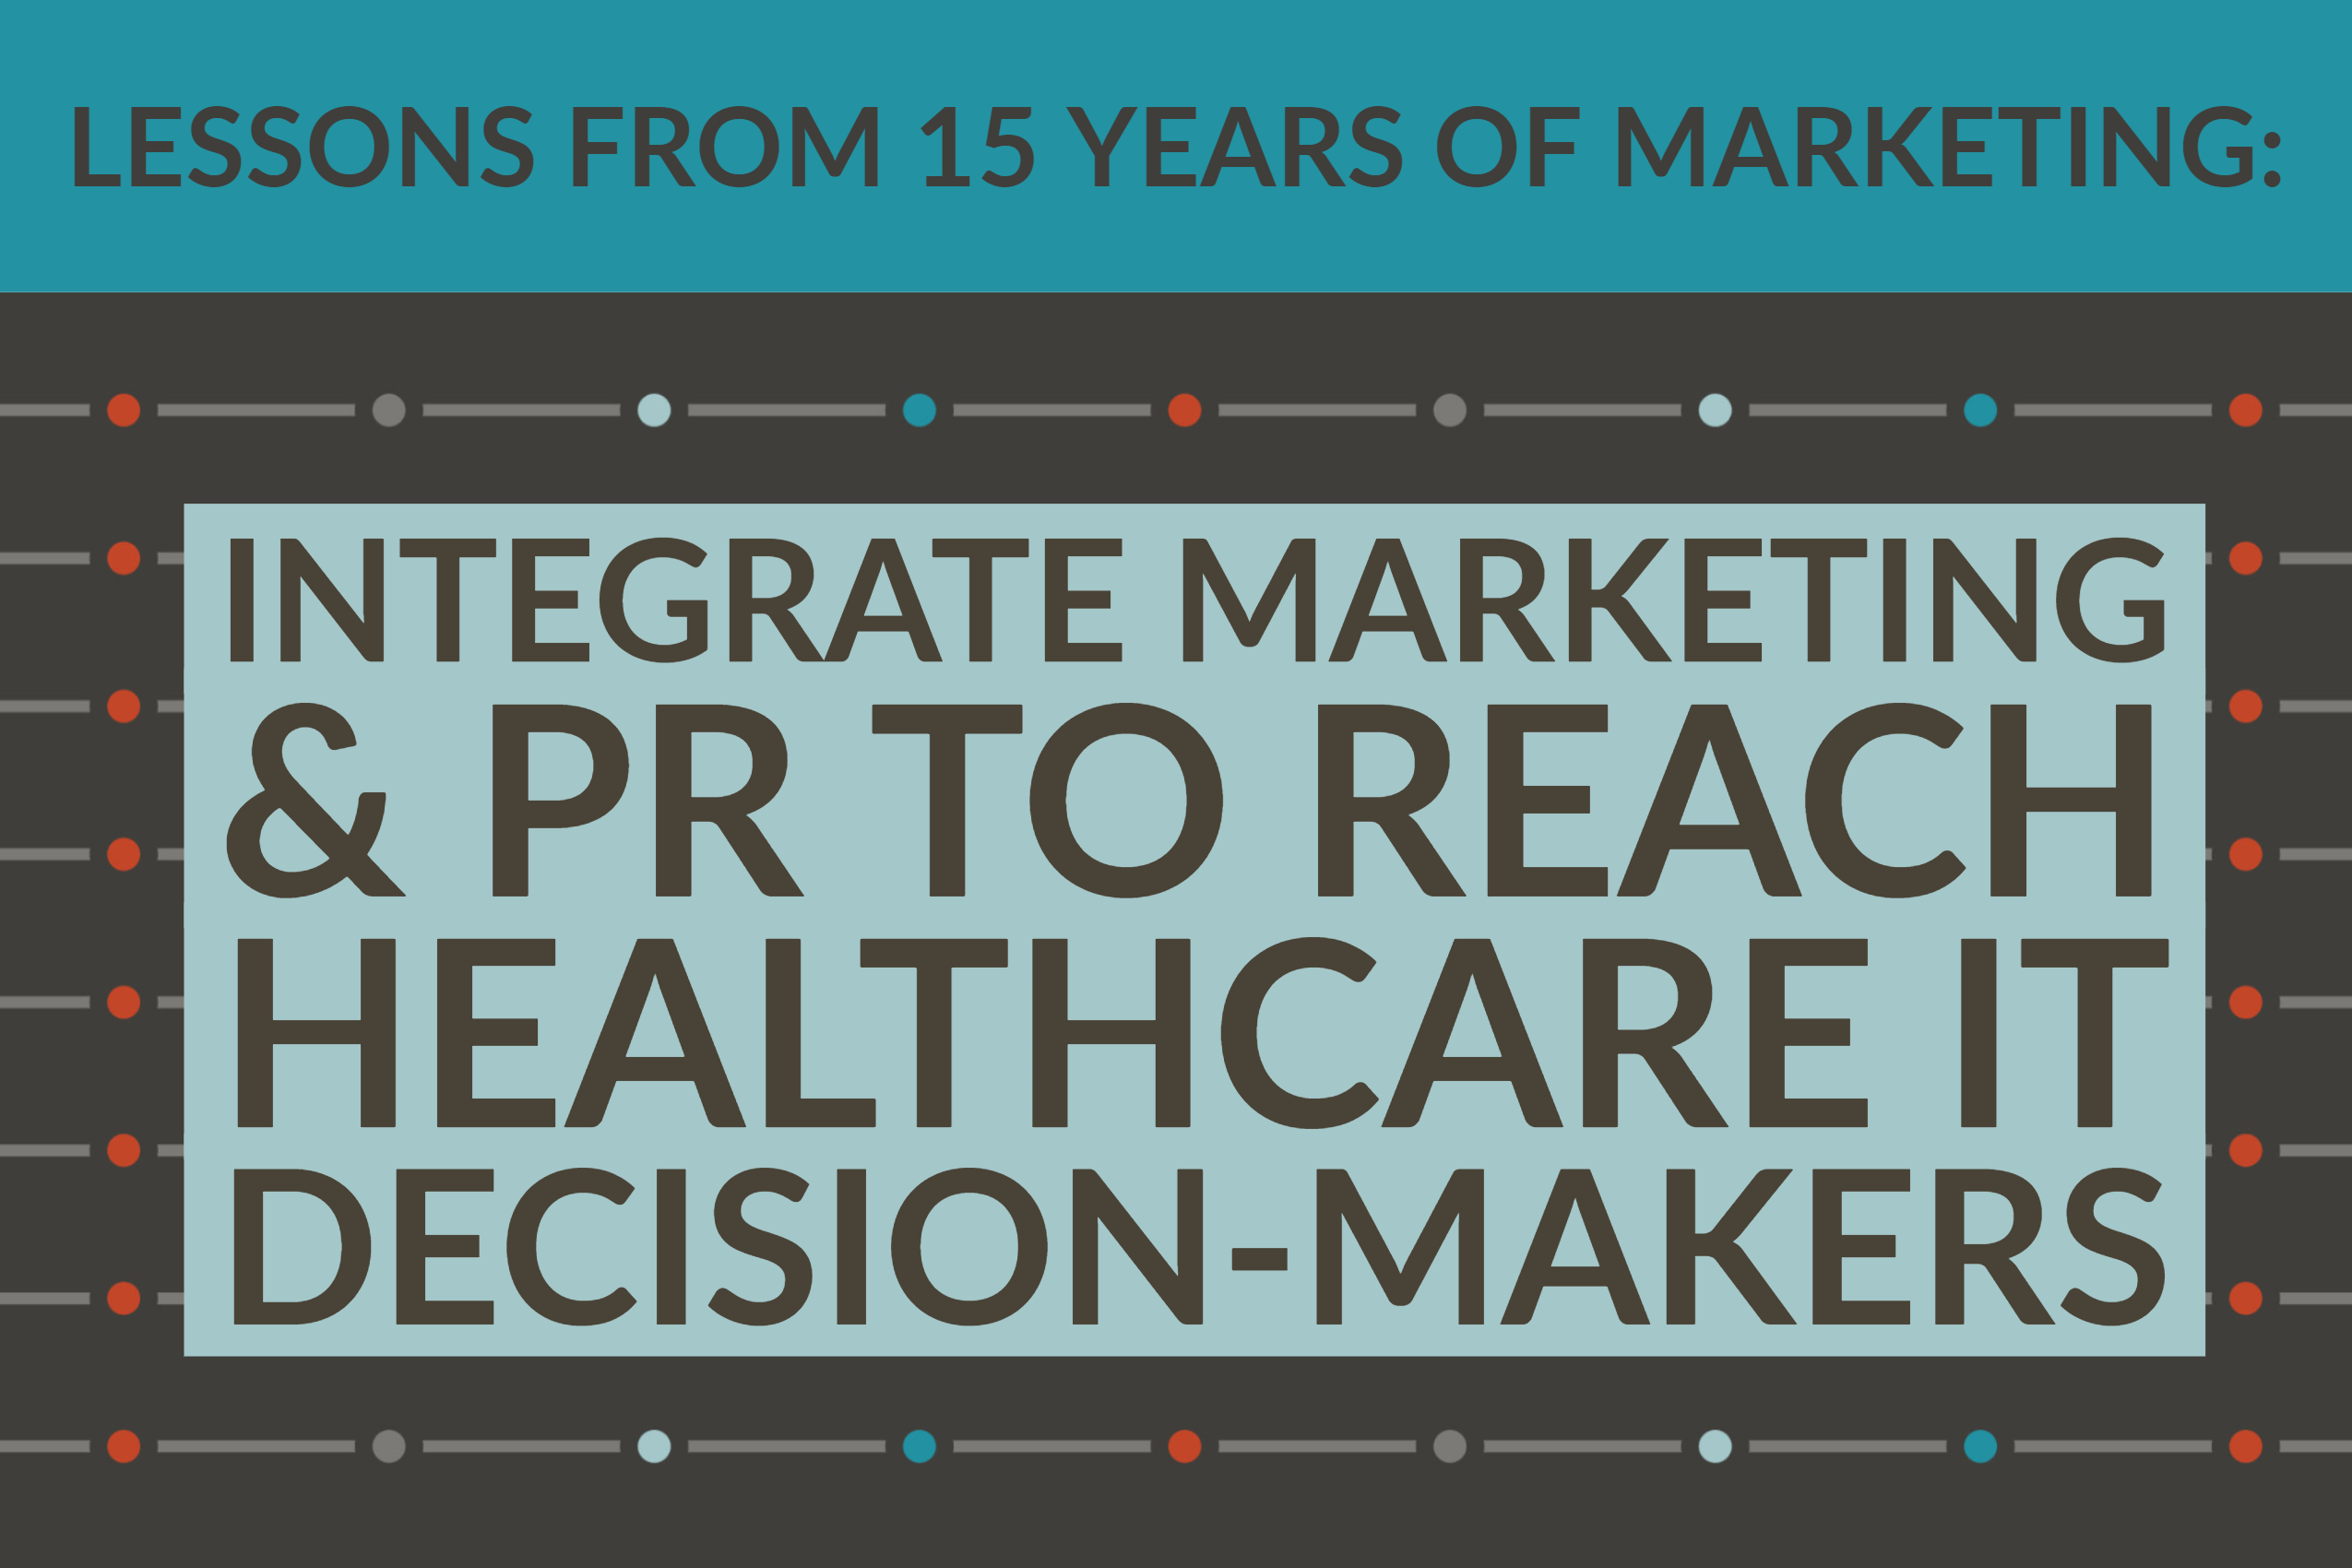 Lessons From 15 Years Of Marketing: Integrate Marketing & PR To Reach Healthcare IT Decision-Makers